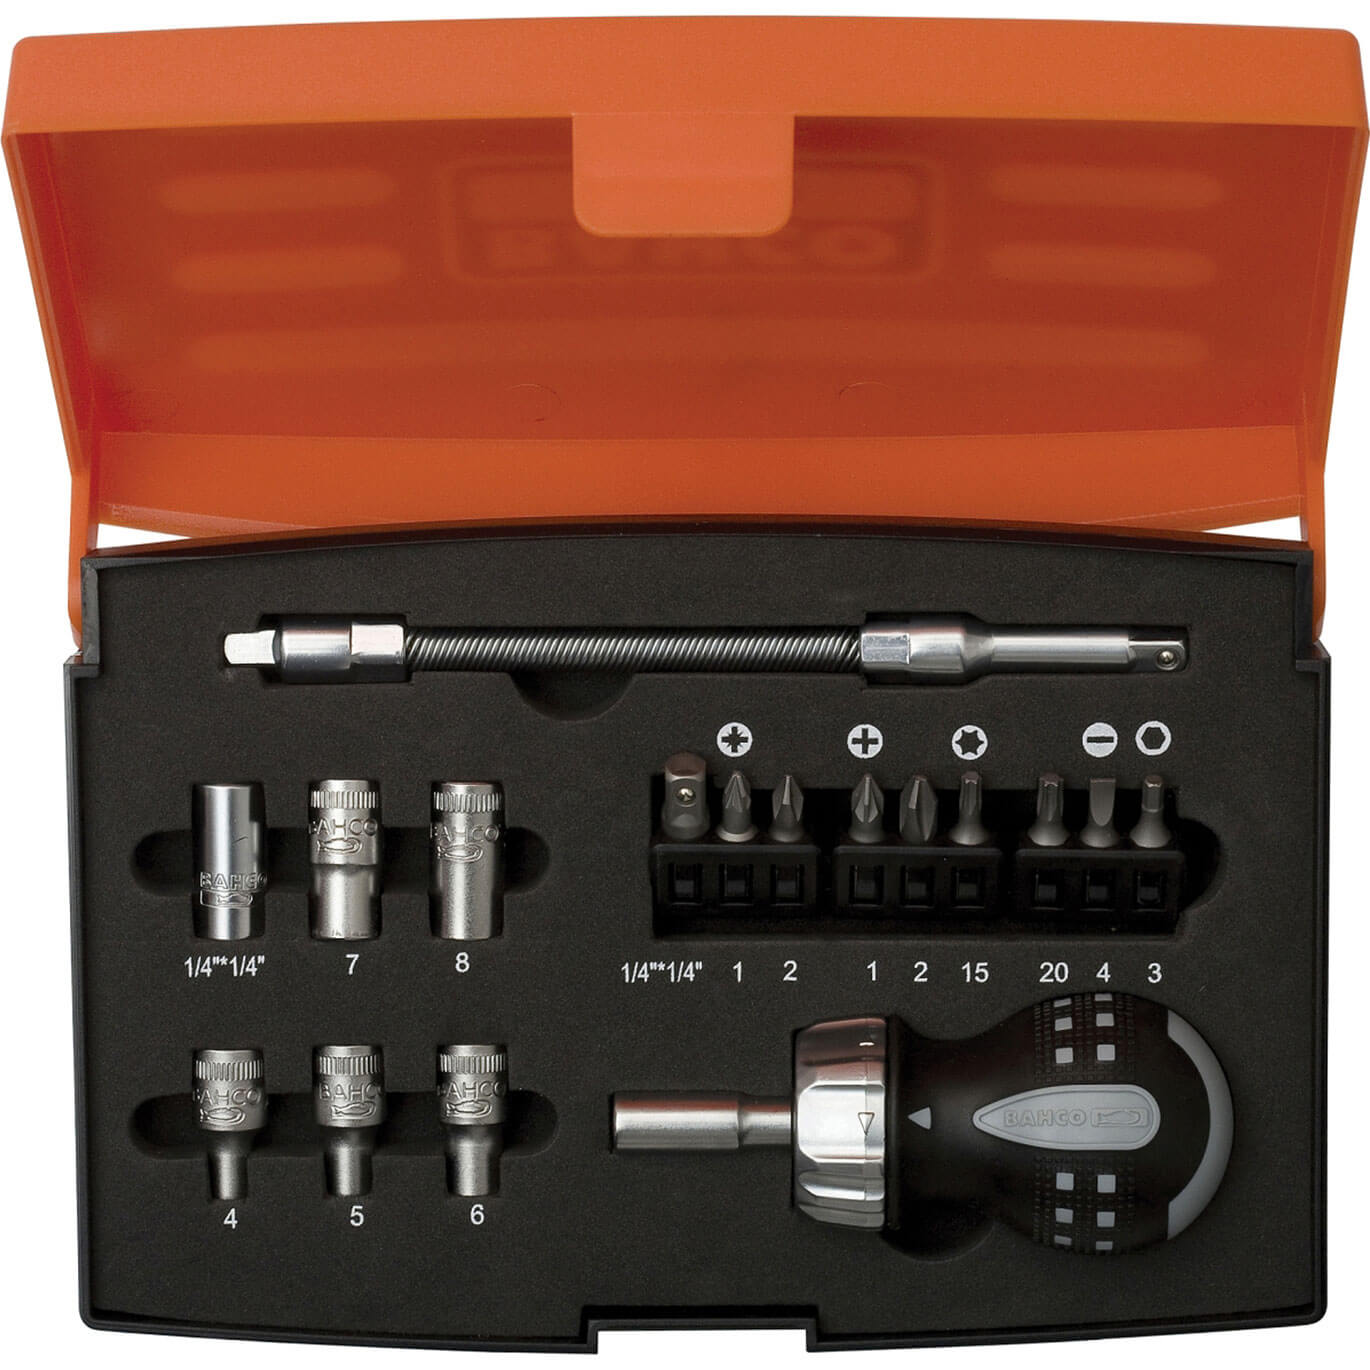 Image of Bahco 18 Piece Stubby Ratchet Screwdriver and Bit Set 1/4"